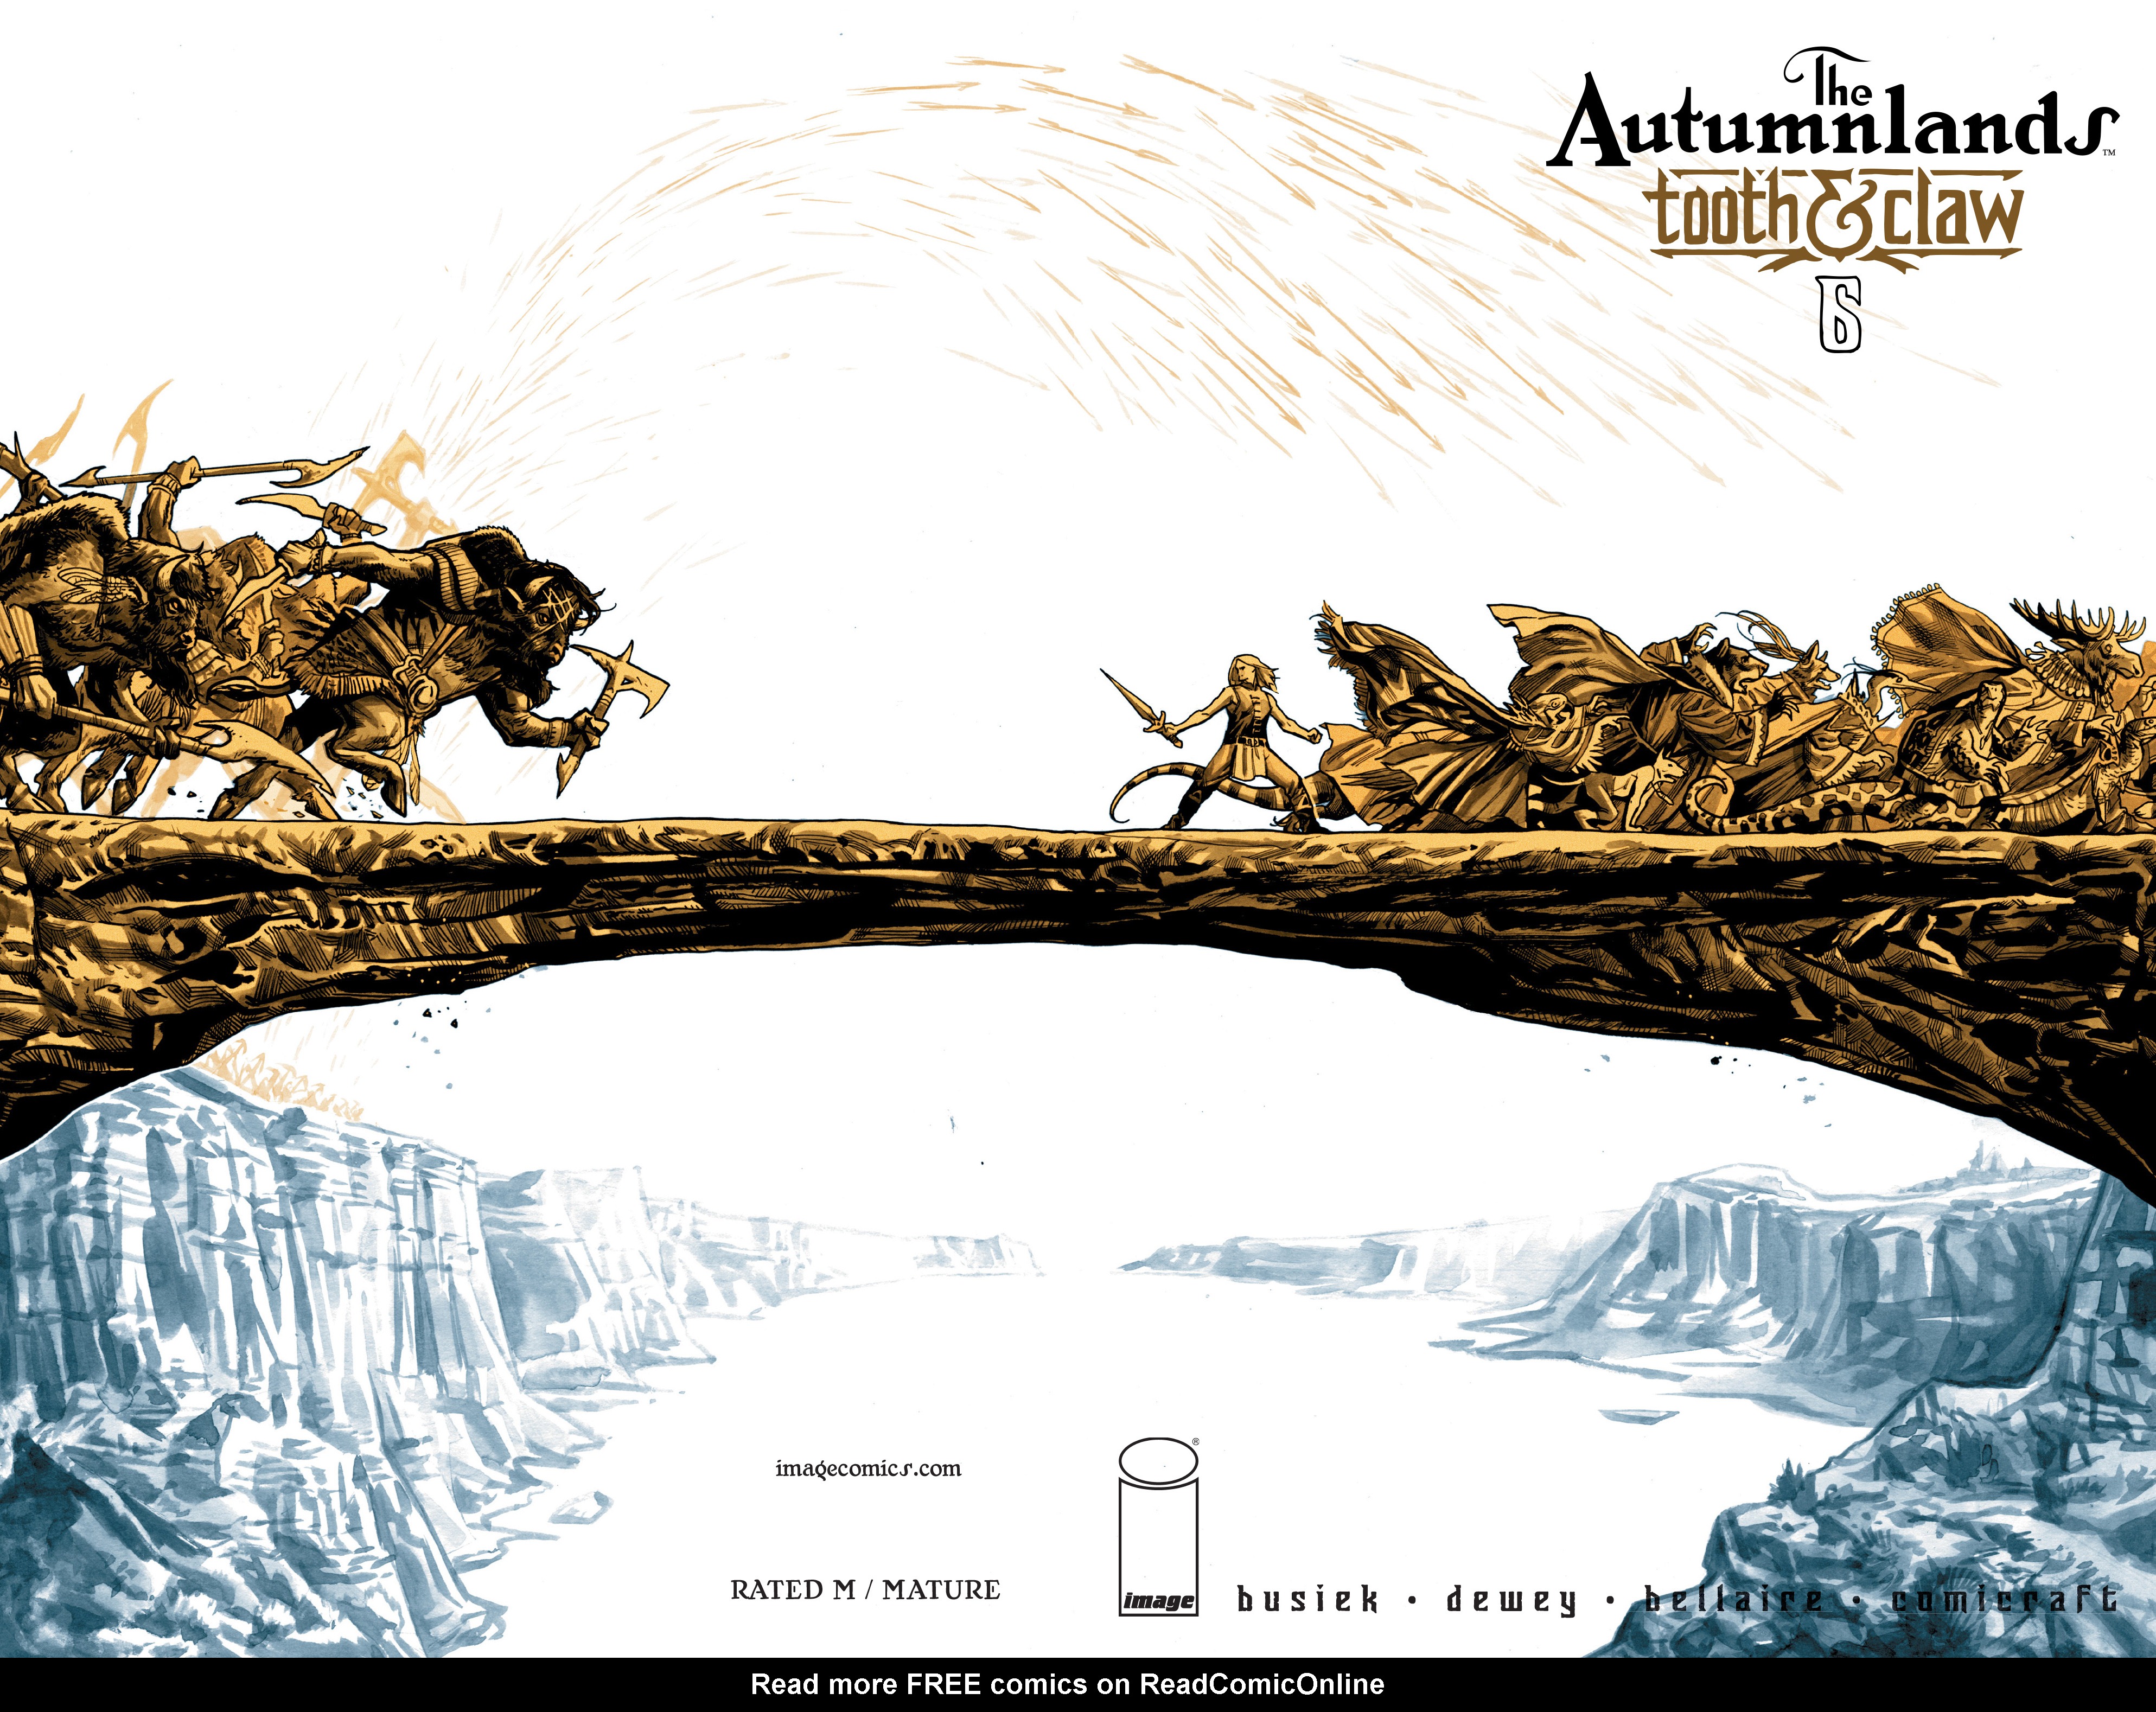 Read online The Autumnlands: Tooth & Claw comic -  Issue #6 - 1